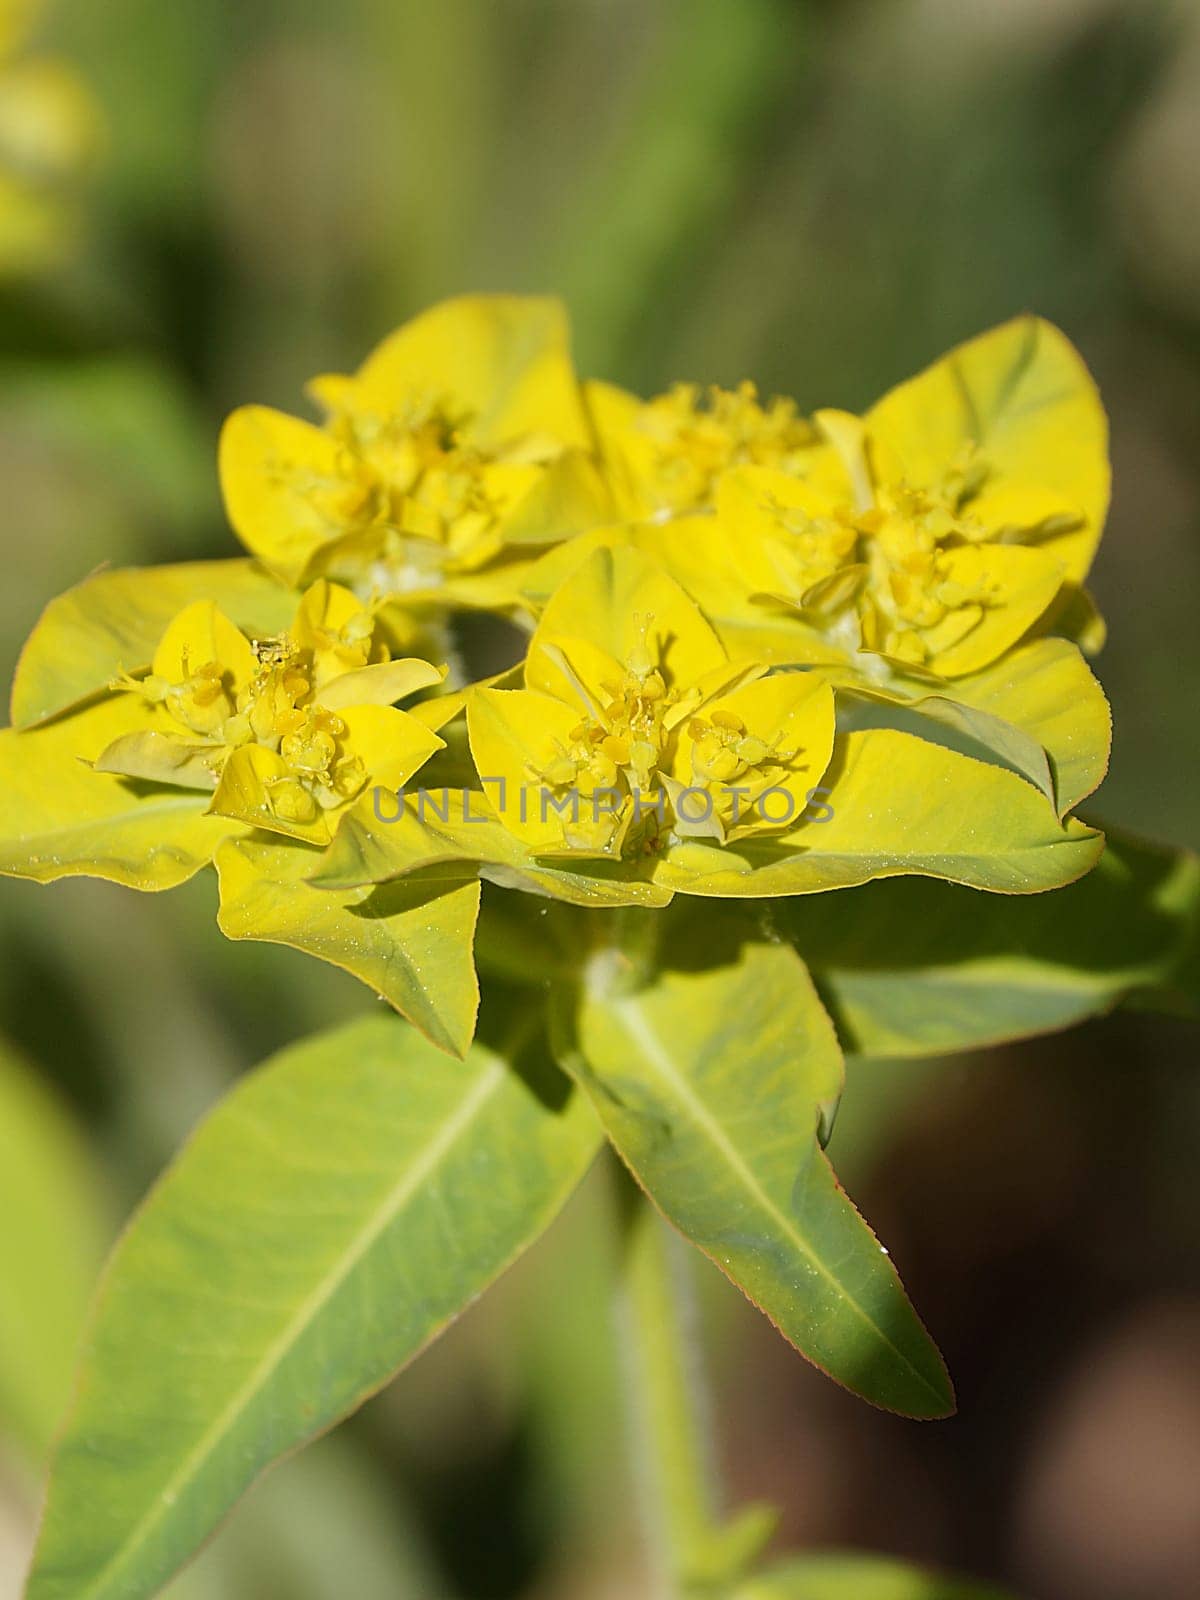 Yellow blooming spurge Euphorbia epithymoides close-up in sunlight.